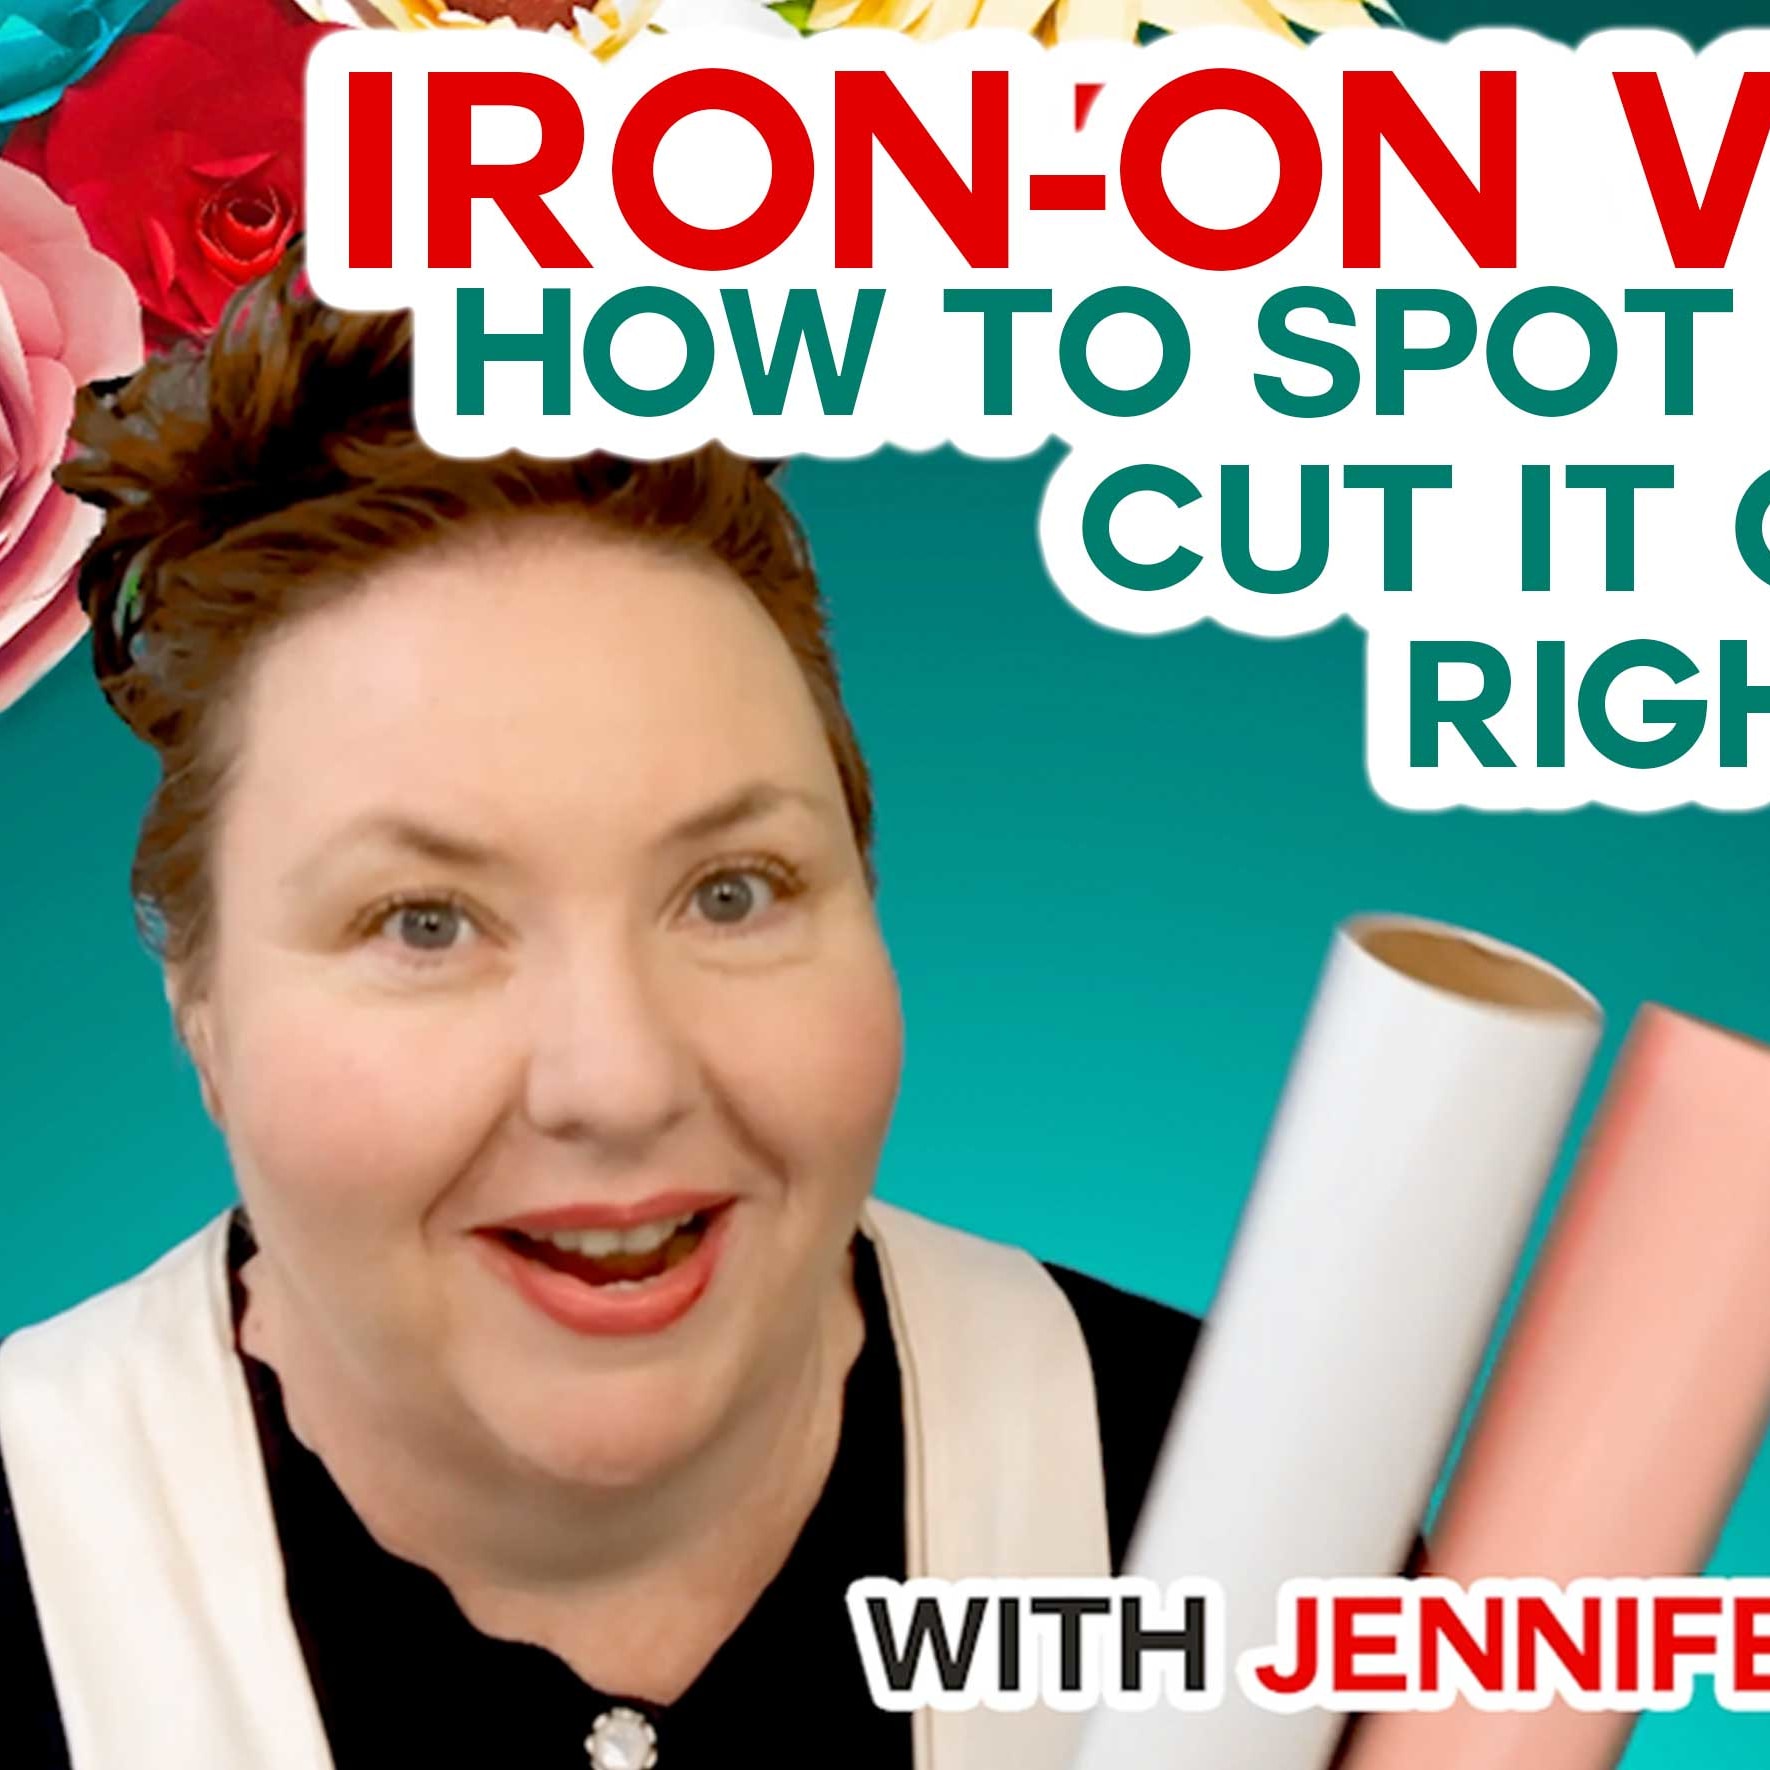 Which Side of Iron On Vinyl Goes Down? - Jennifer Maker